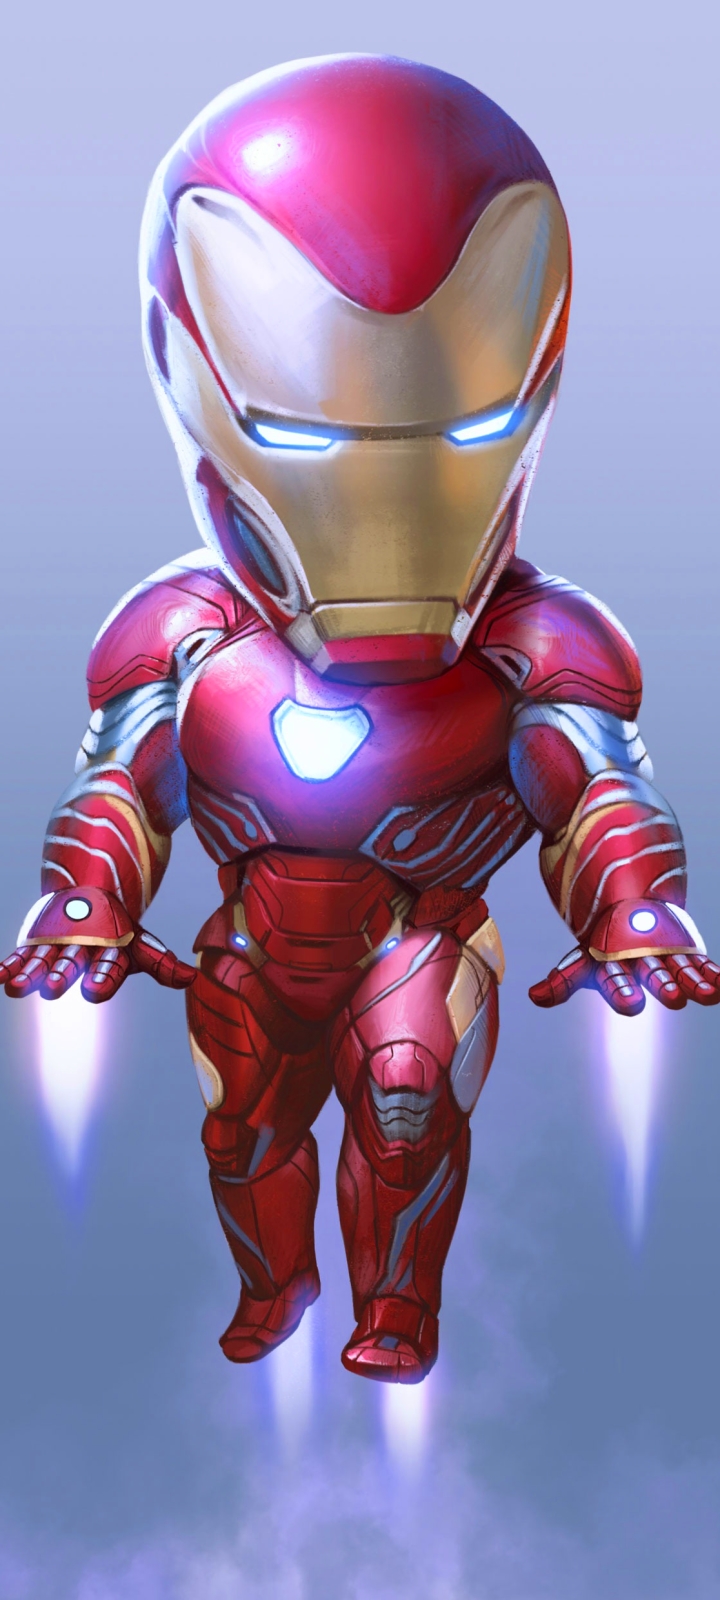 Mobile wallpaper: Iron Man, Movie, Chibi, The Avengers, Avengers: Infinity  War, 1173643 download the picture for free.